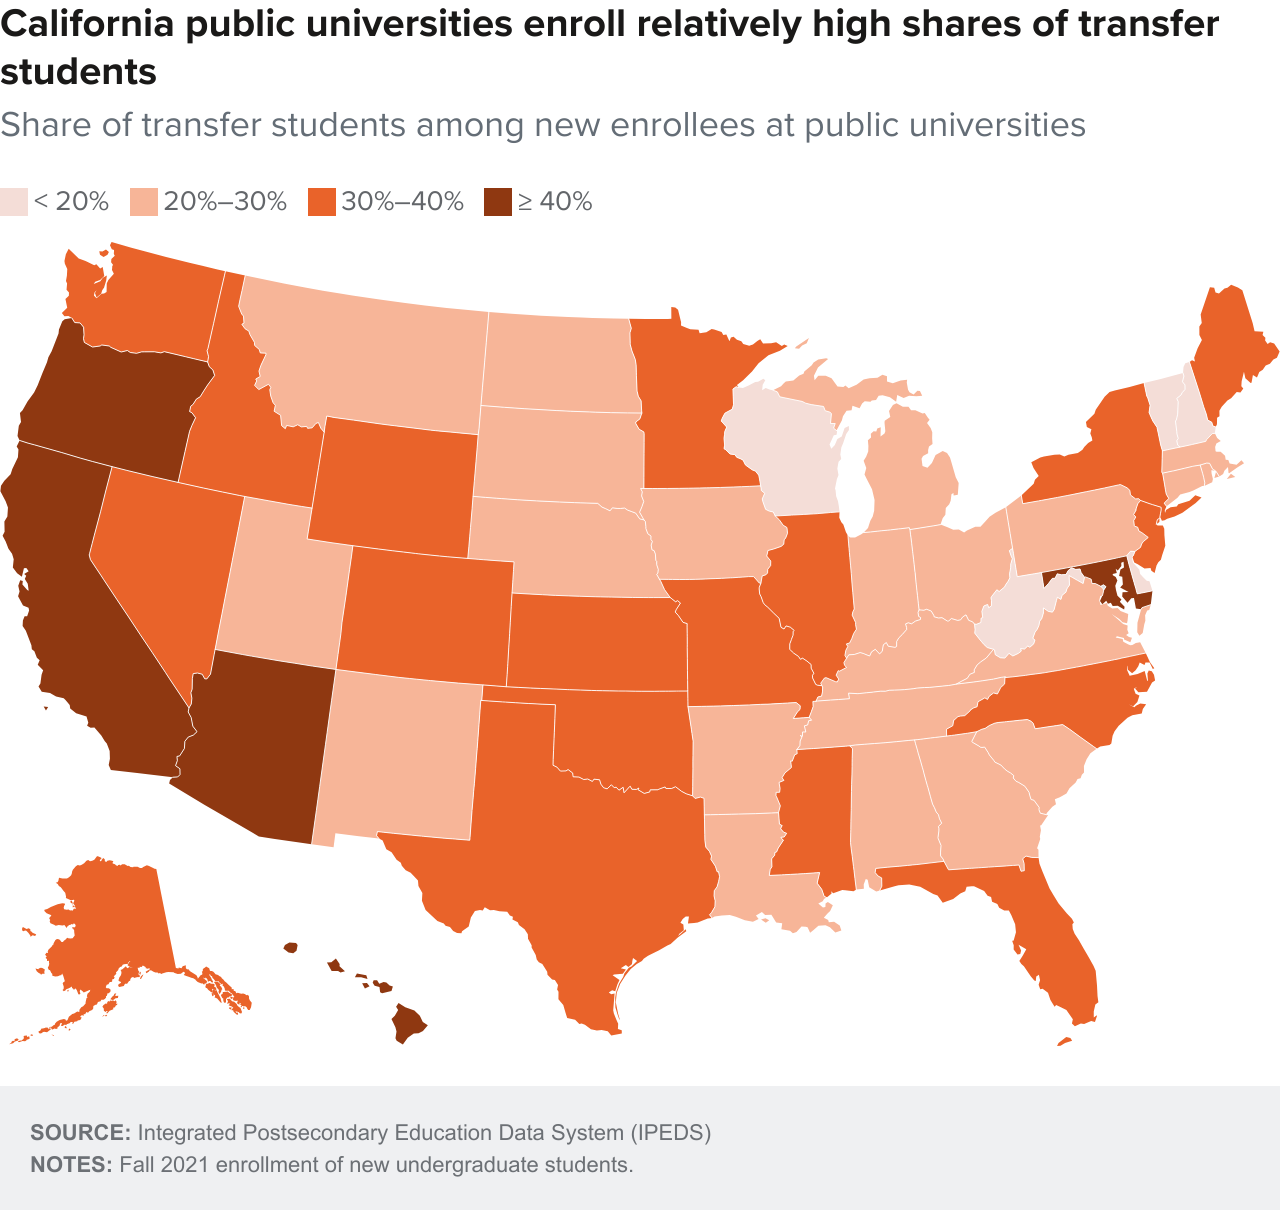 figure 1 - California public universities enroll relatively high shares of transfer students